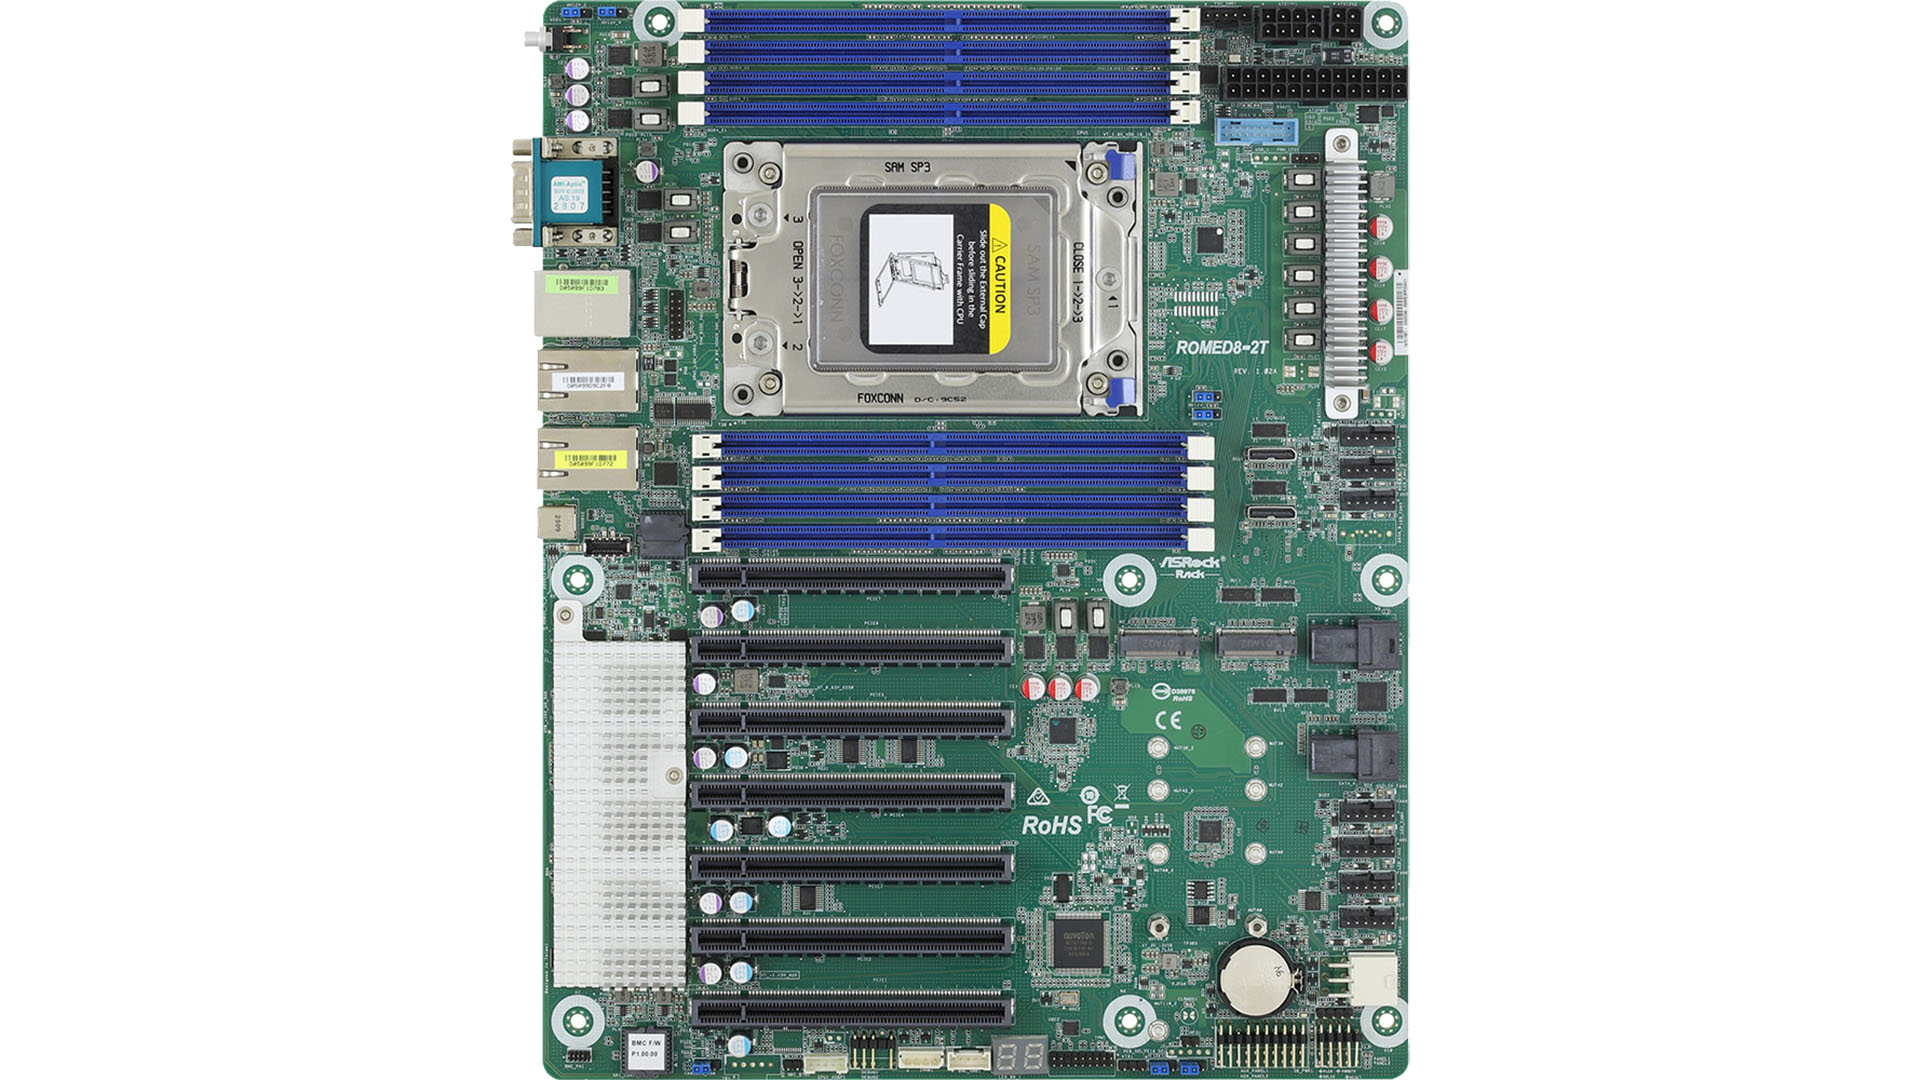 AsRock ROMED8-2T ATX motherboard with 7 x16 PCIe slots